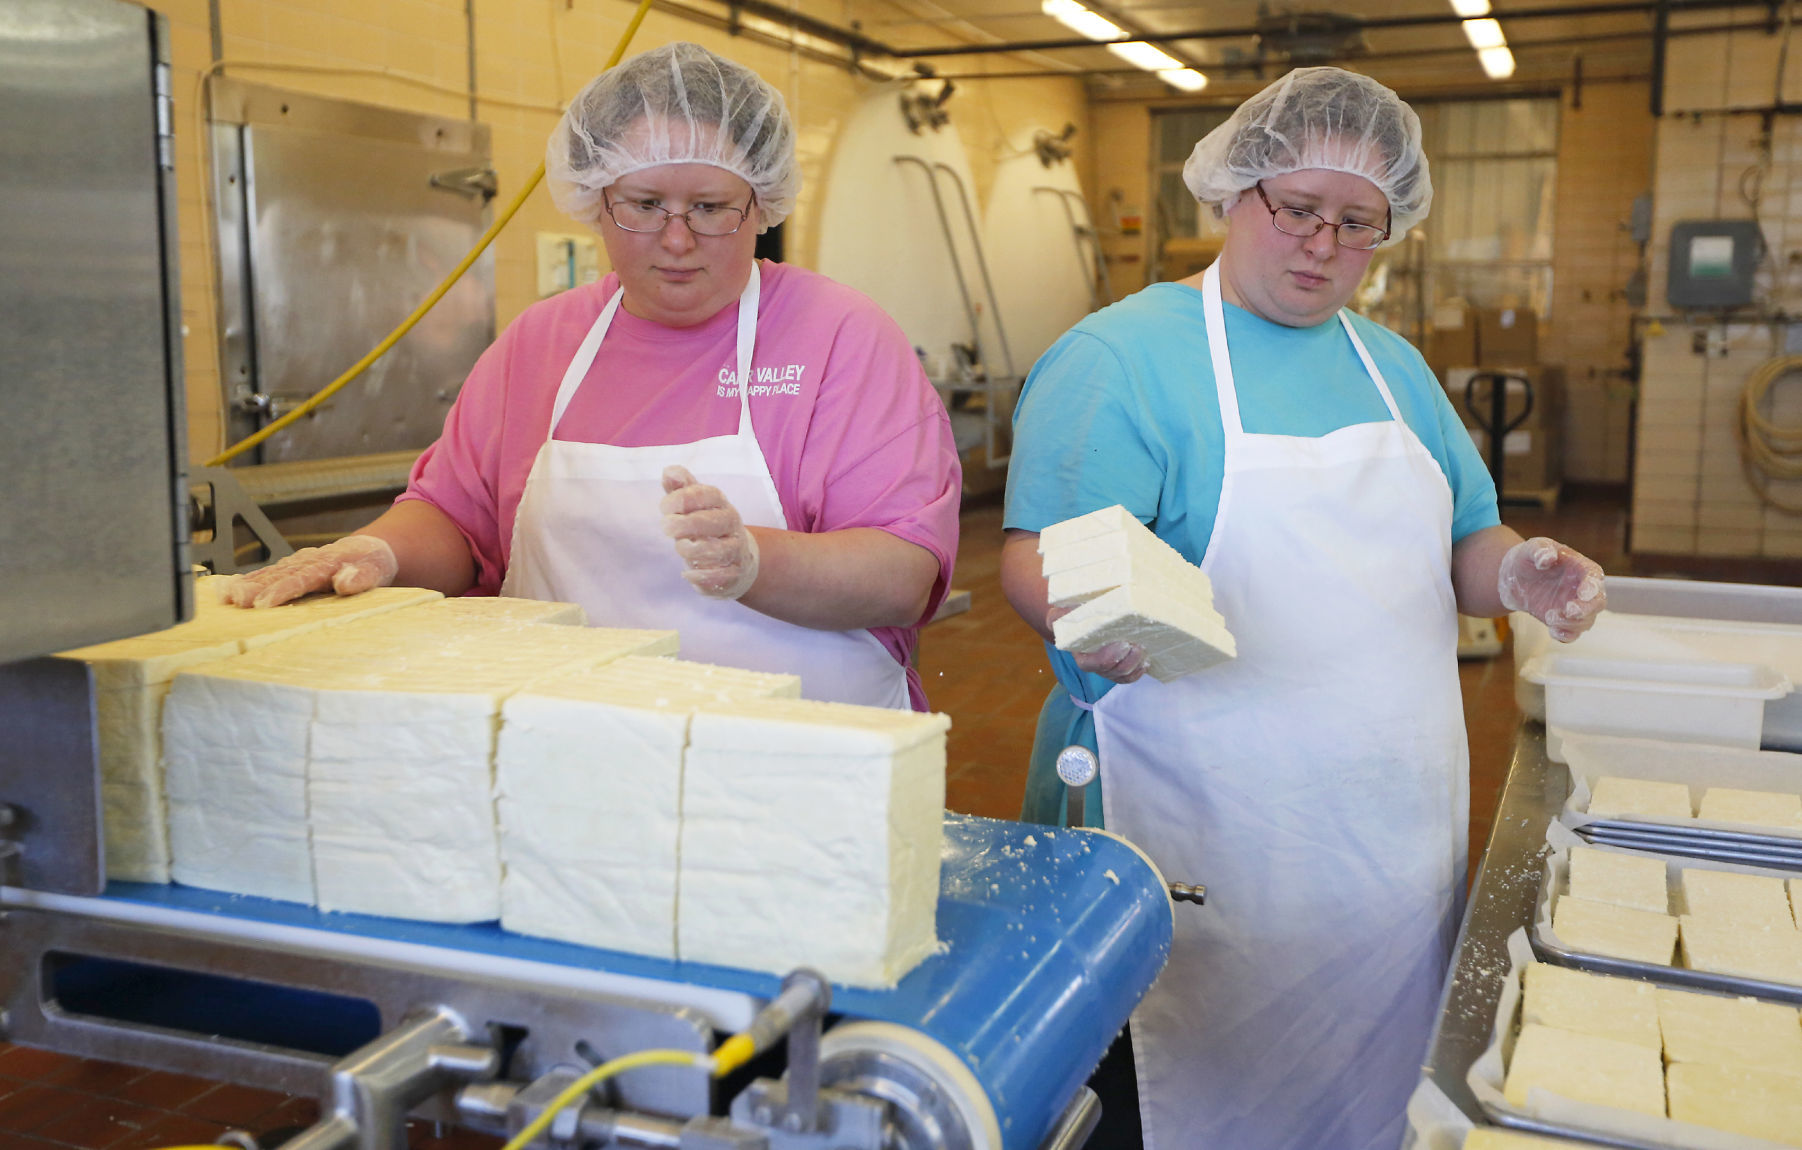 Renee Collins and Amanda Collins, both of Mount Hope, Wis., prepare cheese to be put in the oven at Carr Valley Cheese Company in Fennimore, Wis., on Thursday, Mar. 22, 2018.    PHOTO CREDIT: EILEEN MESLAR